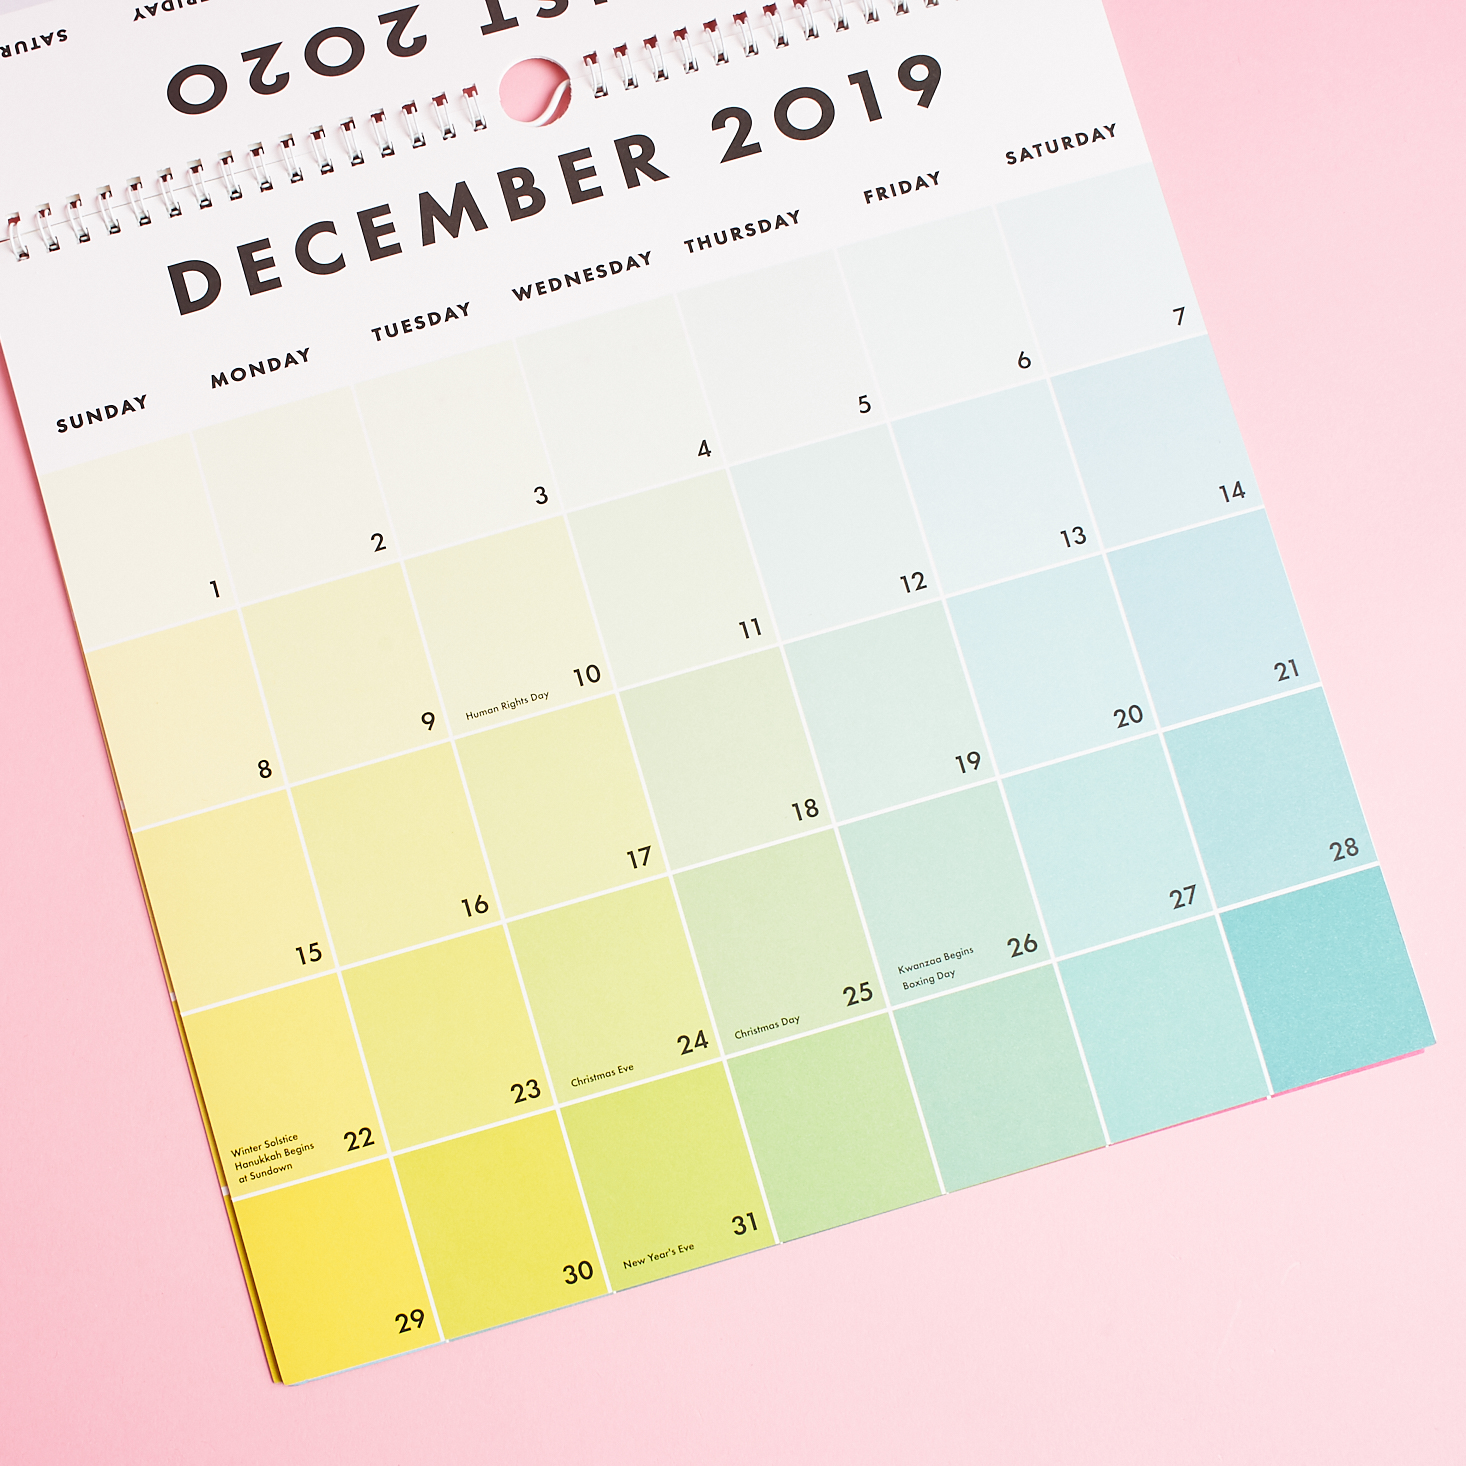 Close up of December month of Paper Source 2020 Paint Chip Calendar